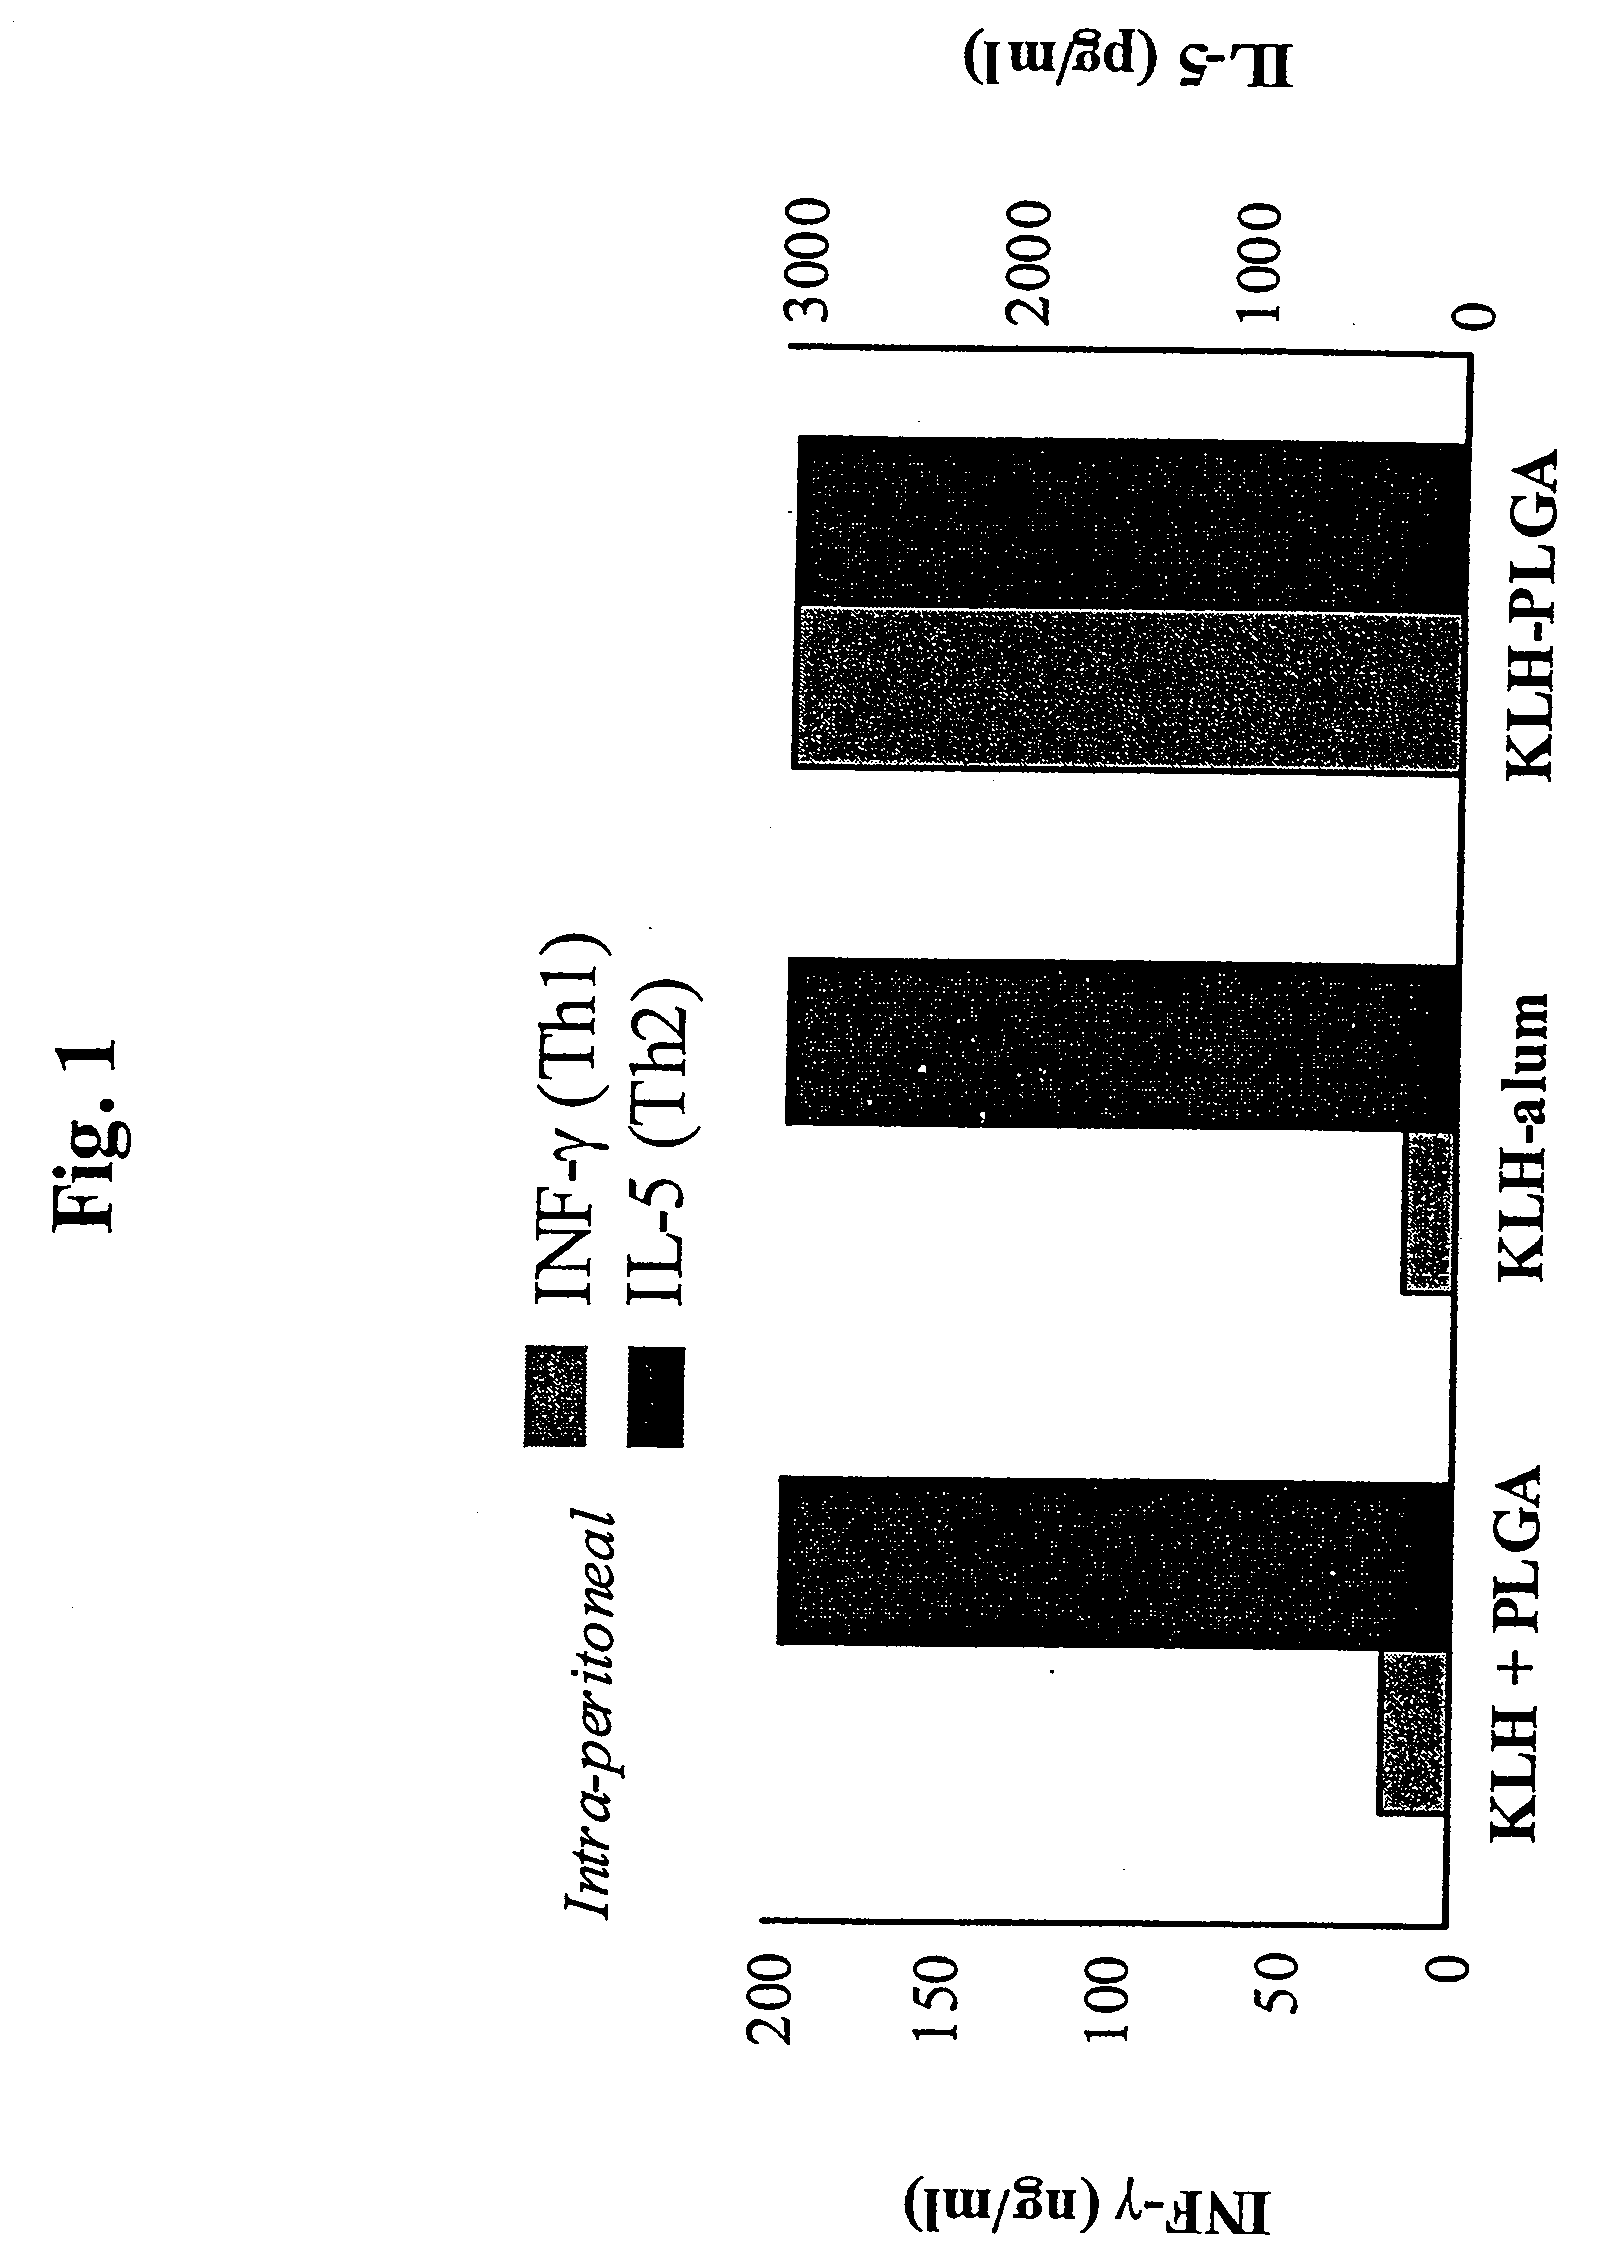 Method for Inducing a Cell-Mediated Immune Response and Improved Parenteral Vaccine Formulations Thereof